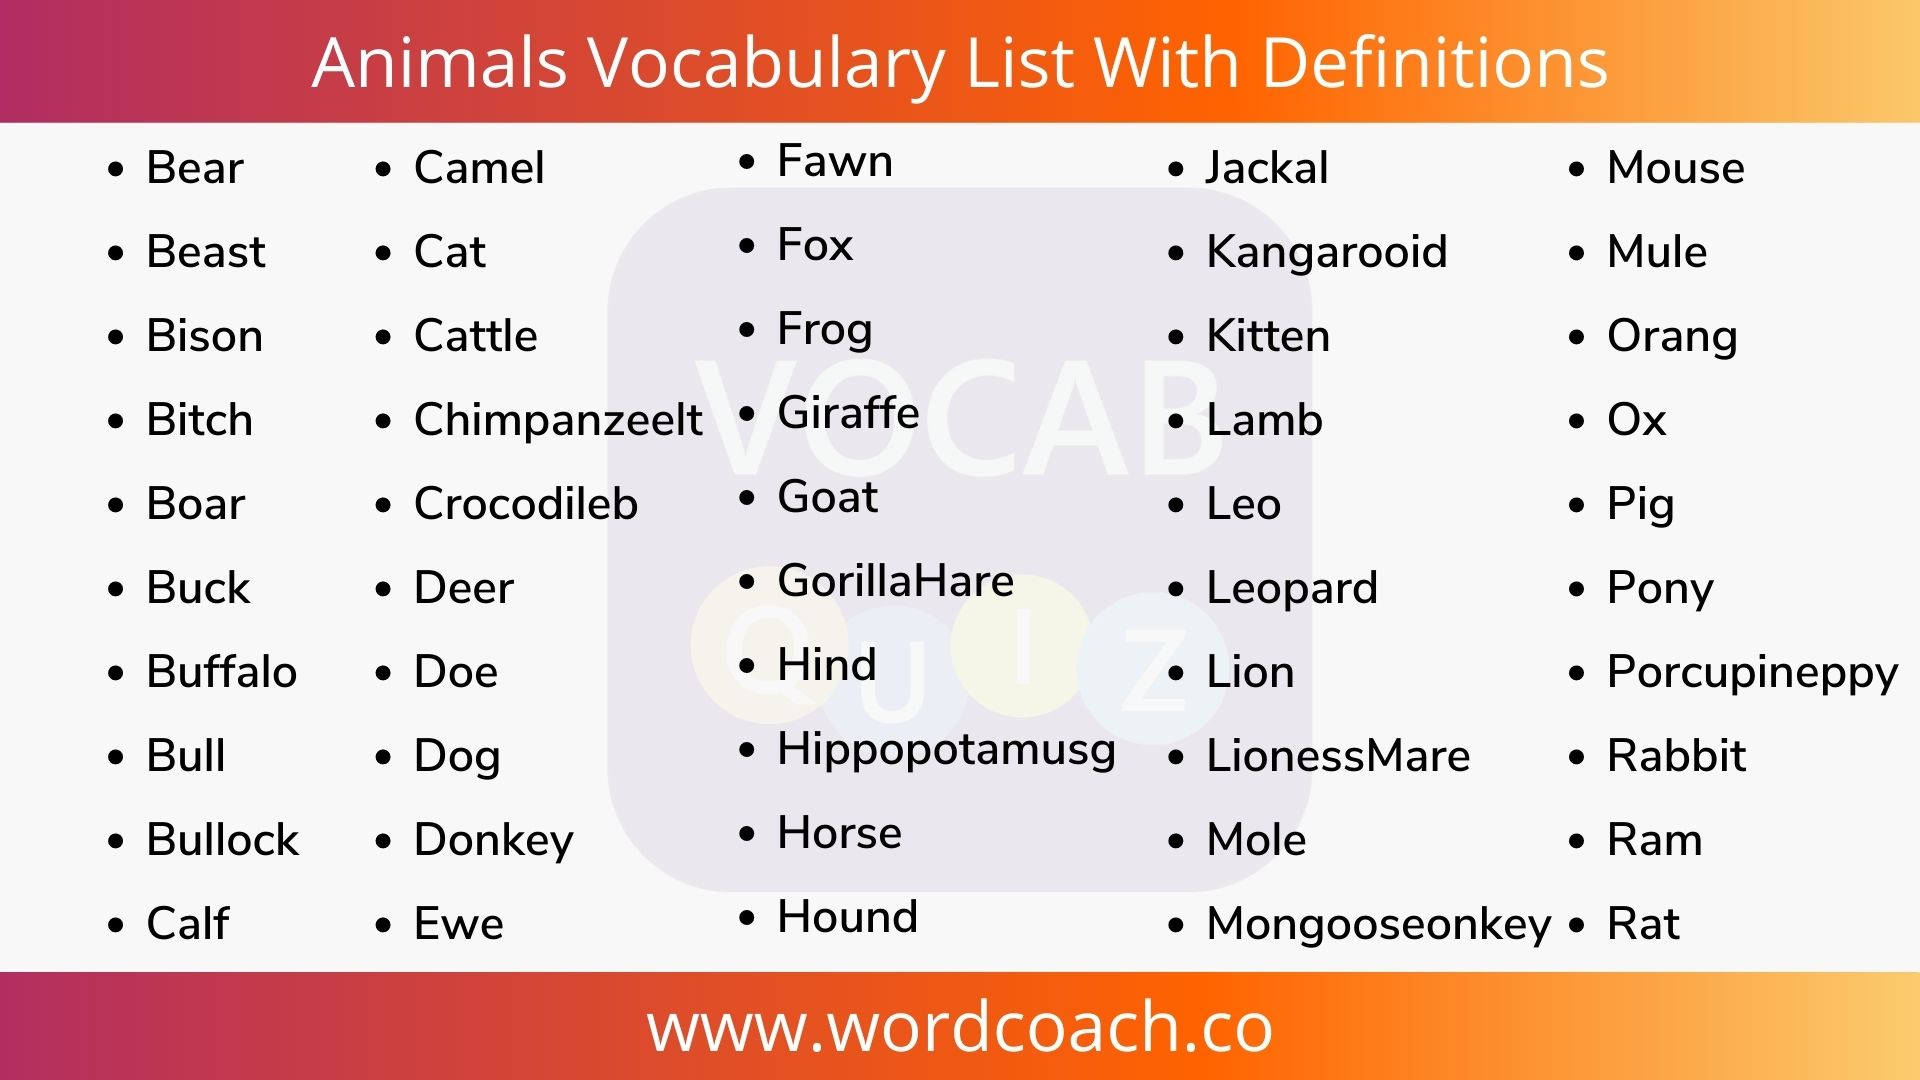 Animals Vocabulary List With Definitions